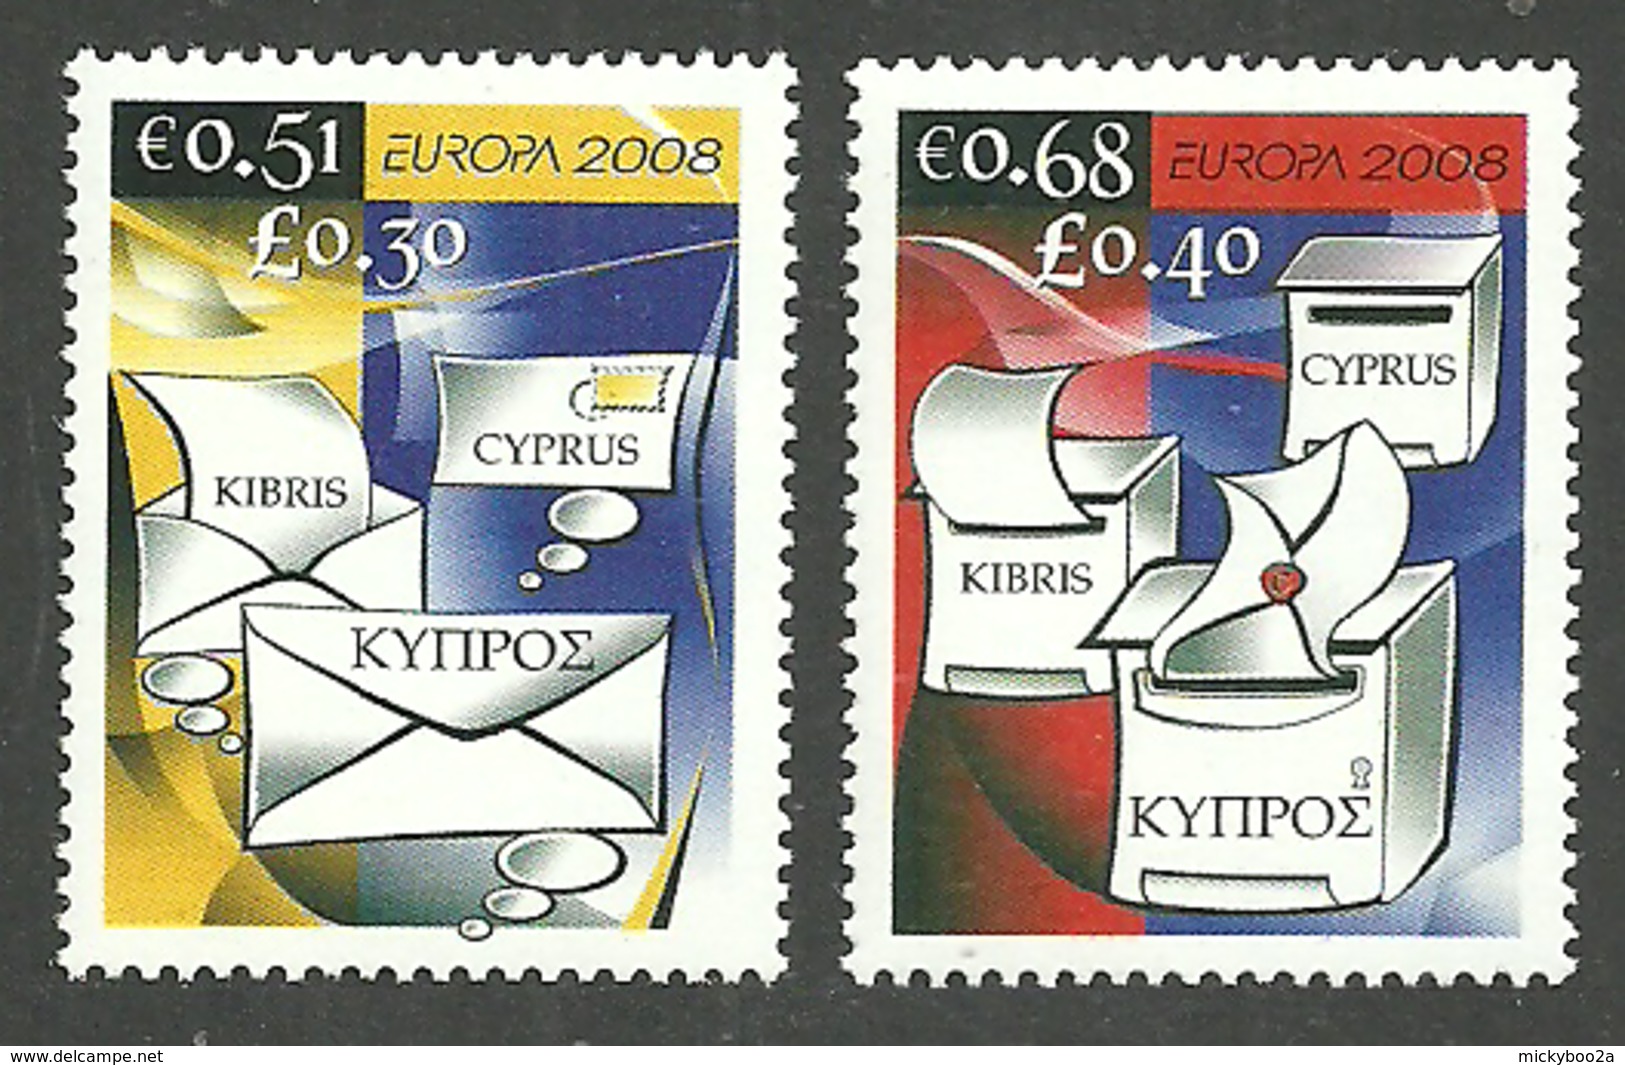 CYPRUS 2008 EUROPA THE LETTER OMNIBUS SET MNH - Unused Stamps